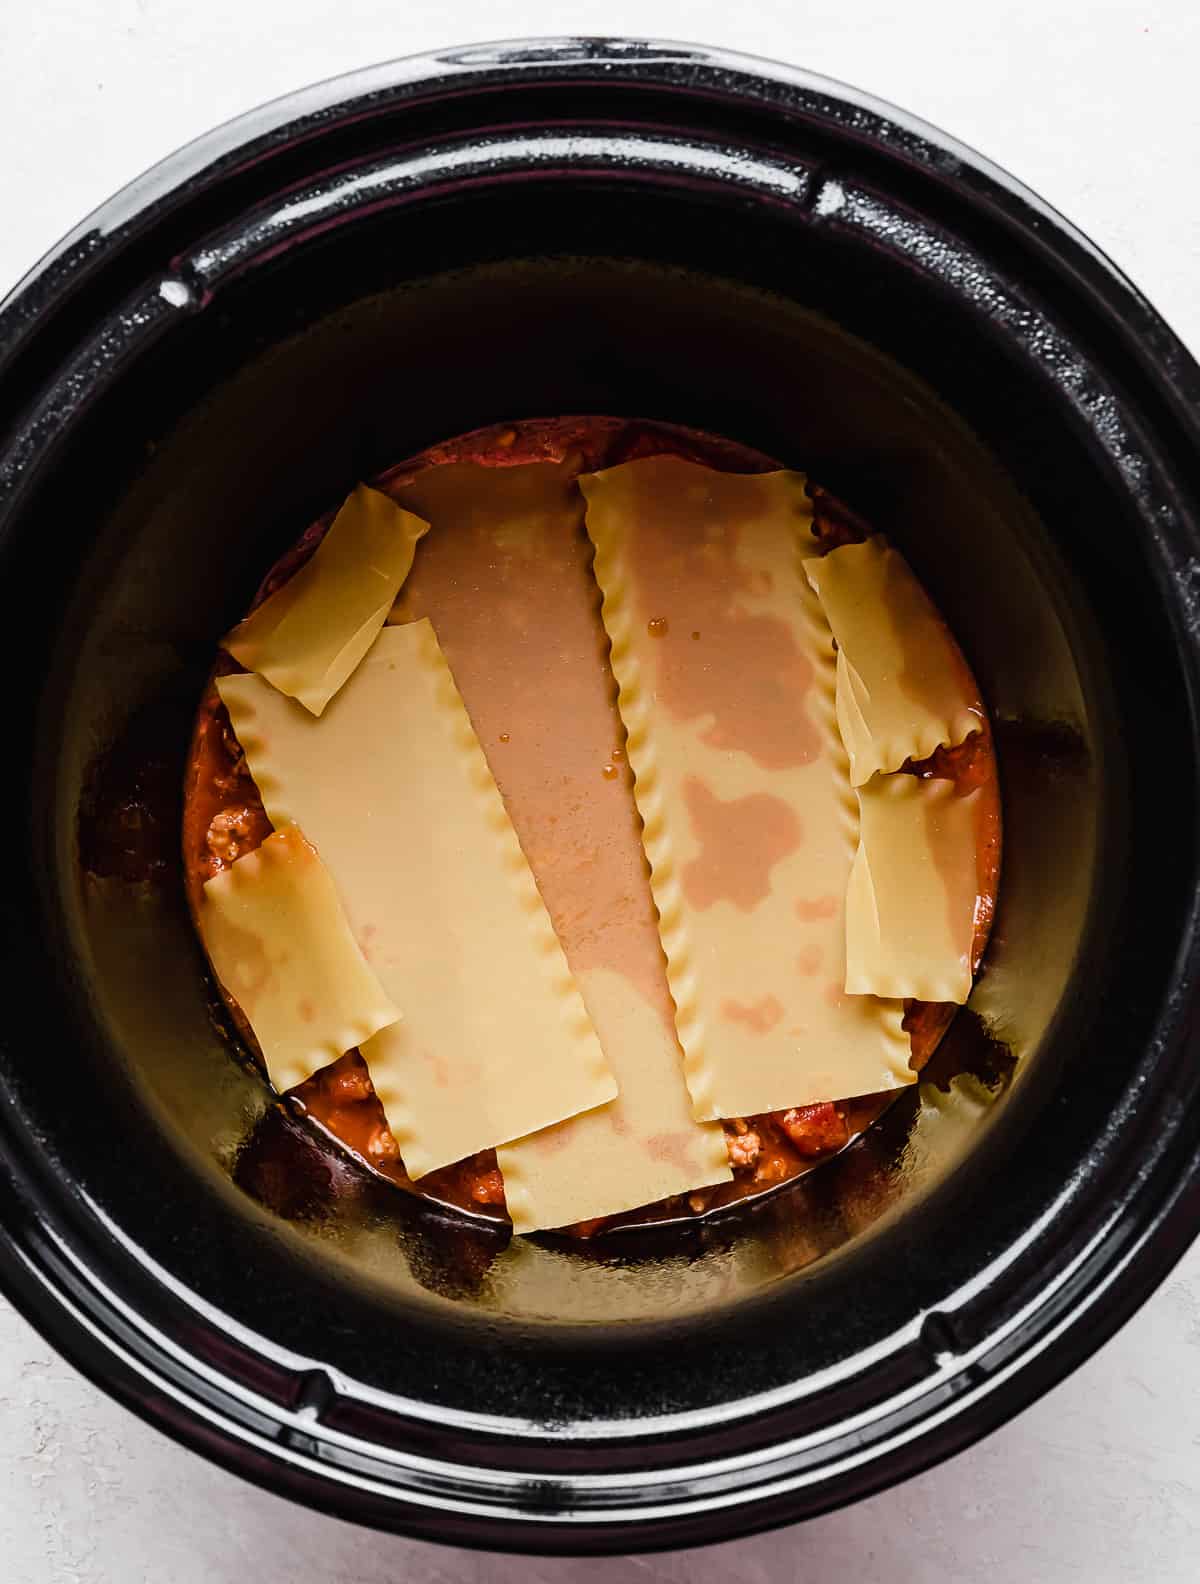 Lasagna noodles in the base of a black round slow cooker.